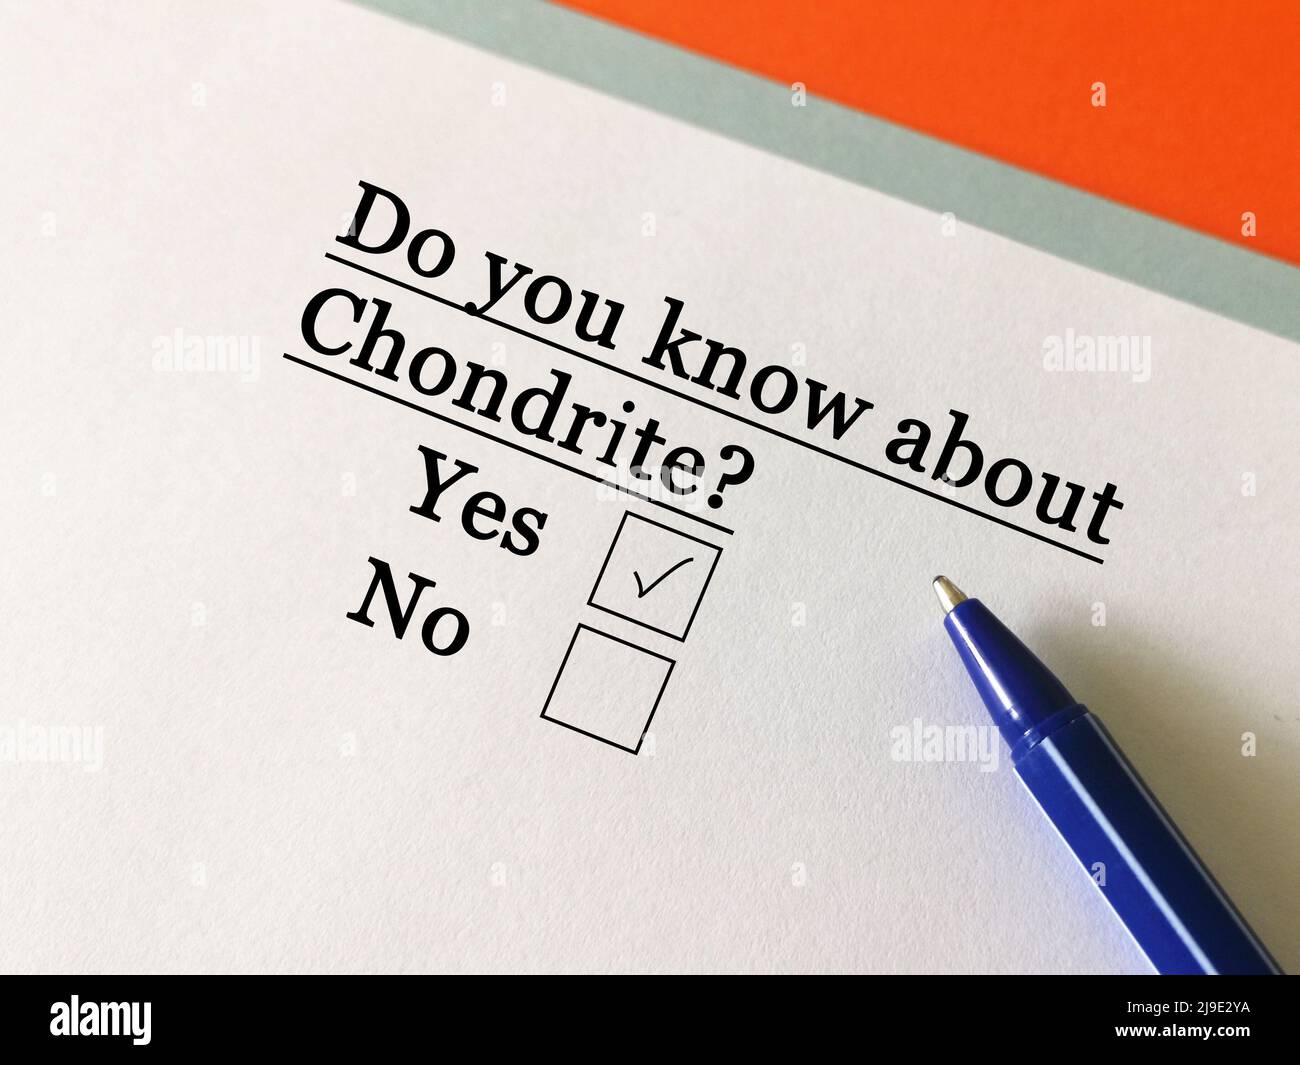 One person is answering question about space technology. He knows about Chondrite. Stock Photo